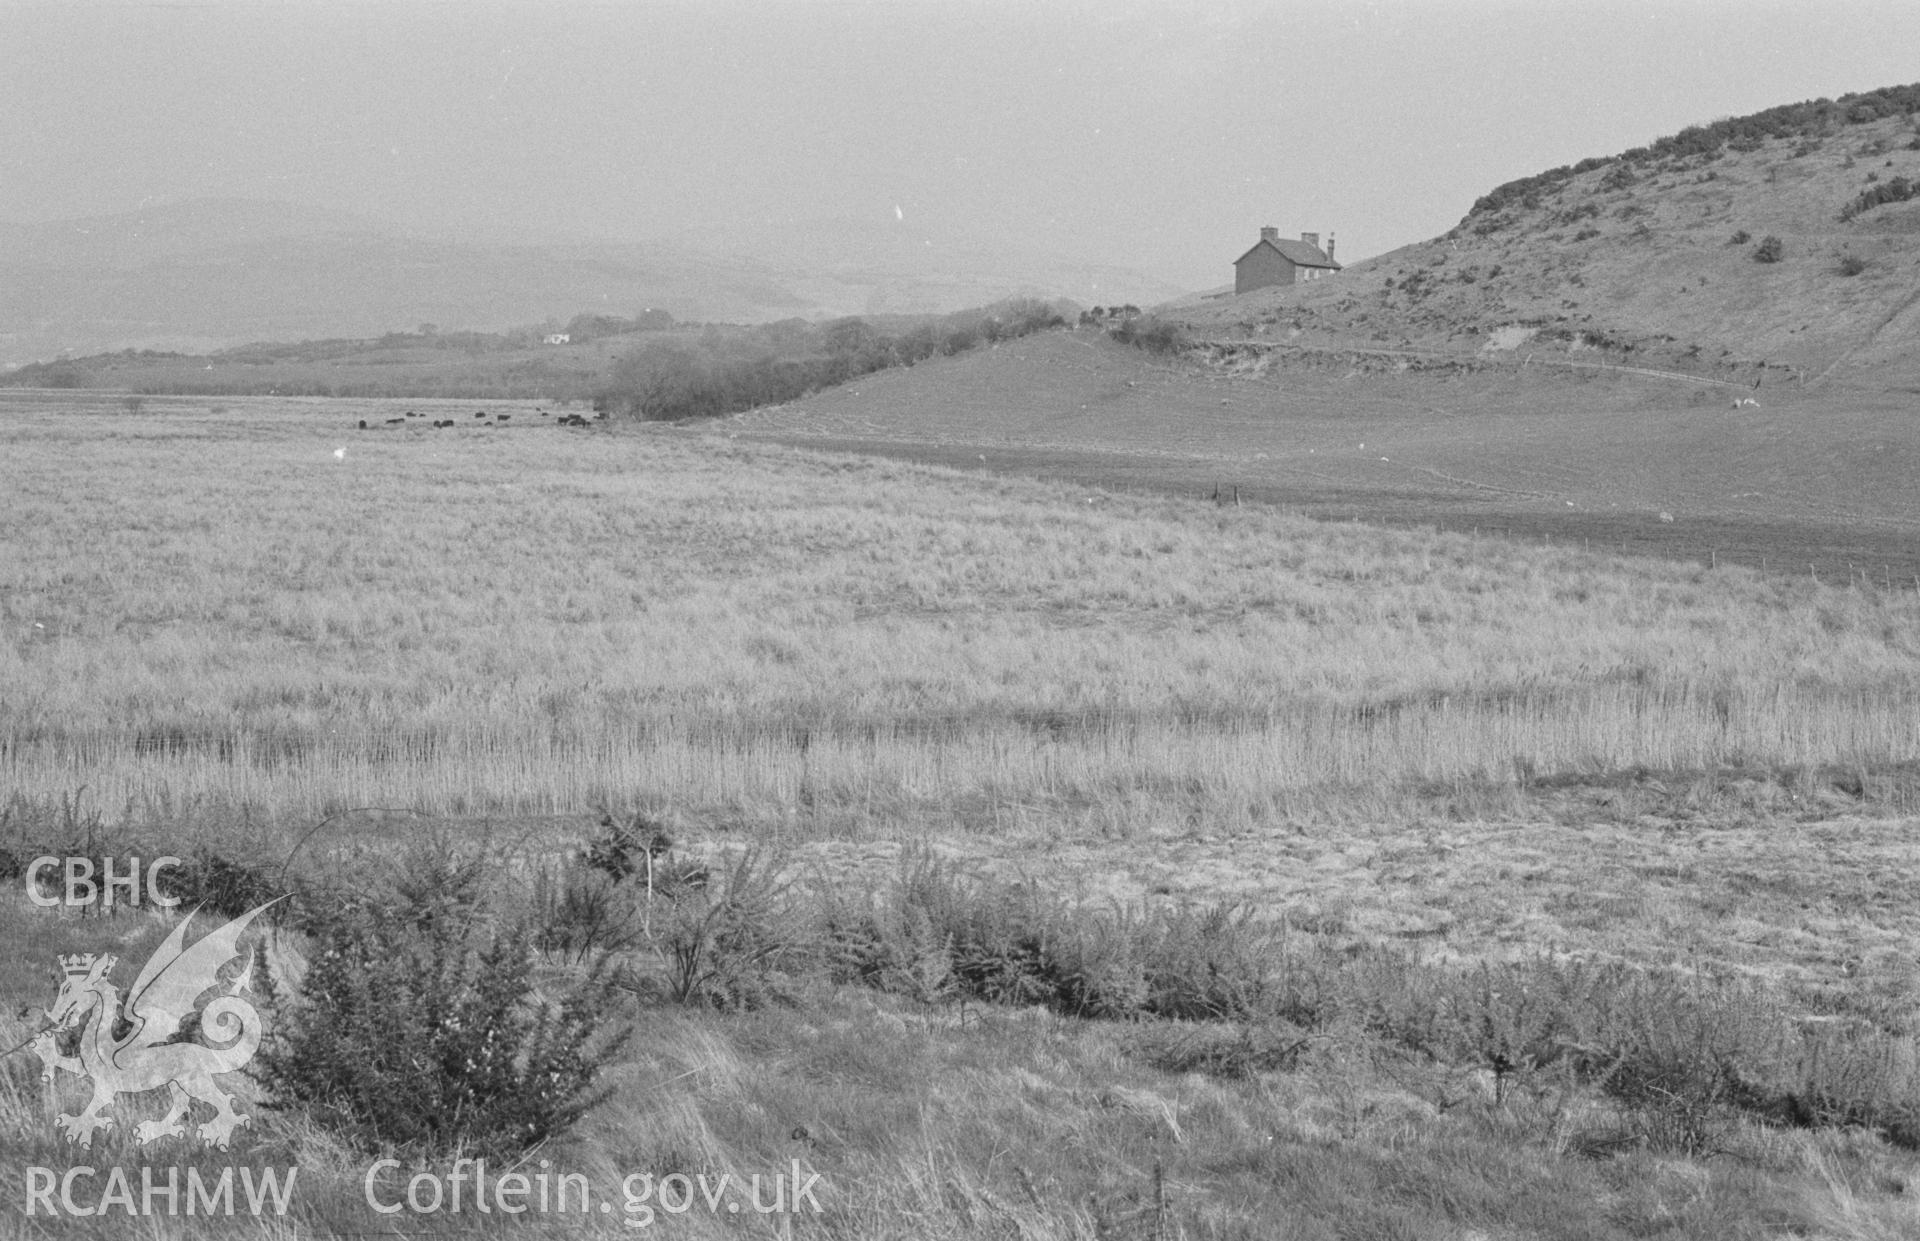 Digital copy of a black and white negative showing Pant-y-Dwn from the Uppingham School seat on the small hillock on footpath across the bog to the church. Photographed by Arthur O. Chater on 10th April 1968, looking east from Grid Reference SN 621 896.